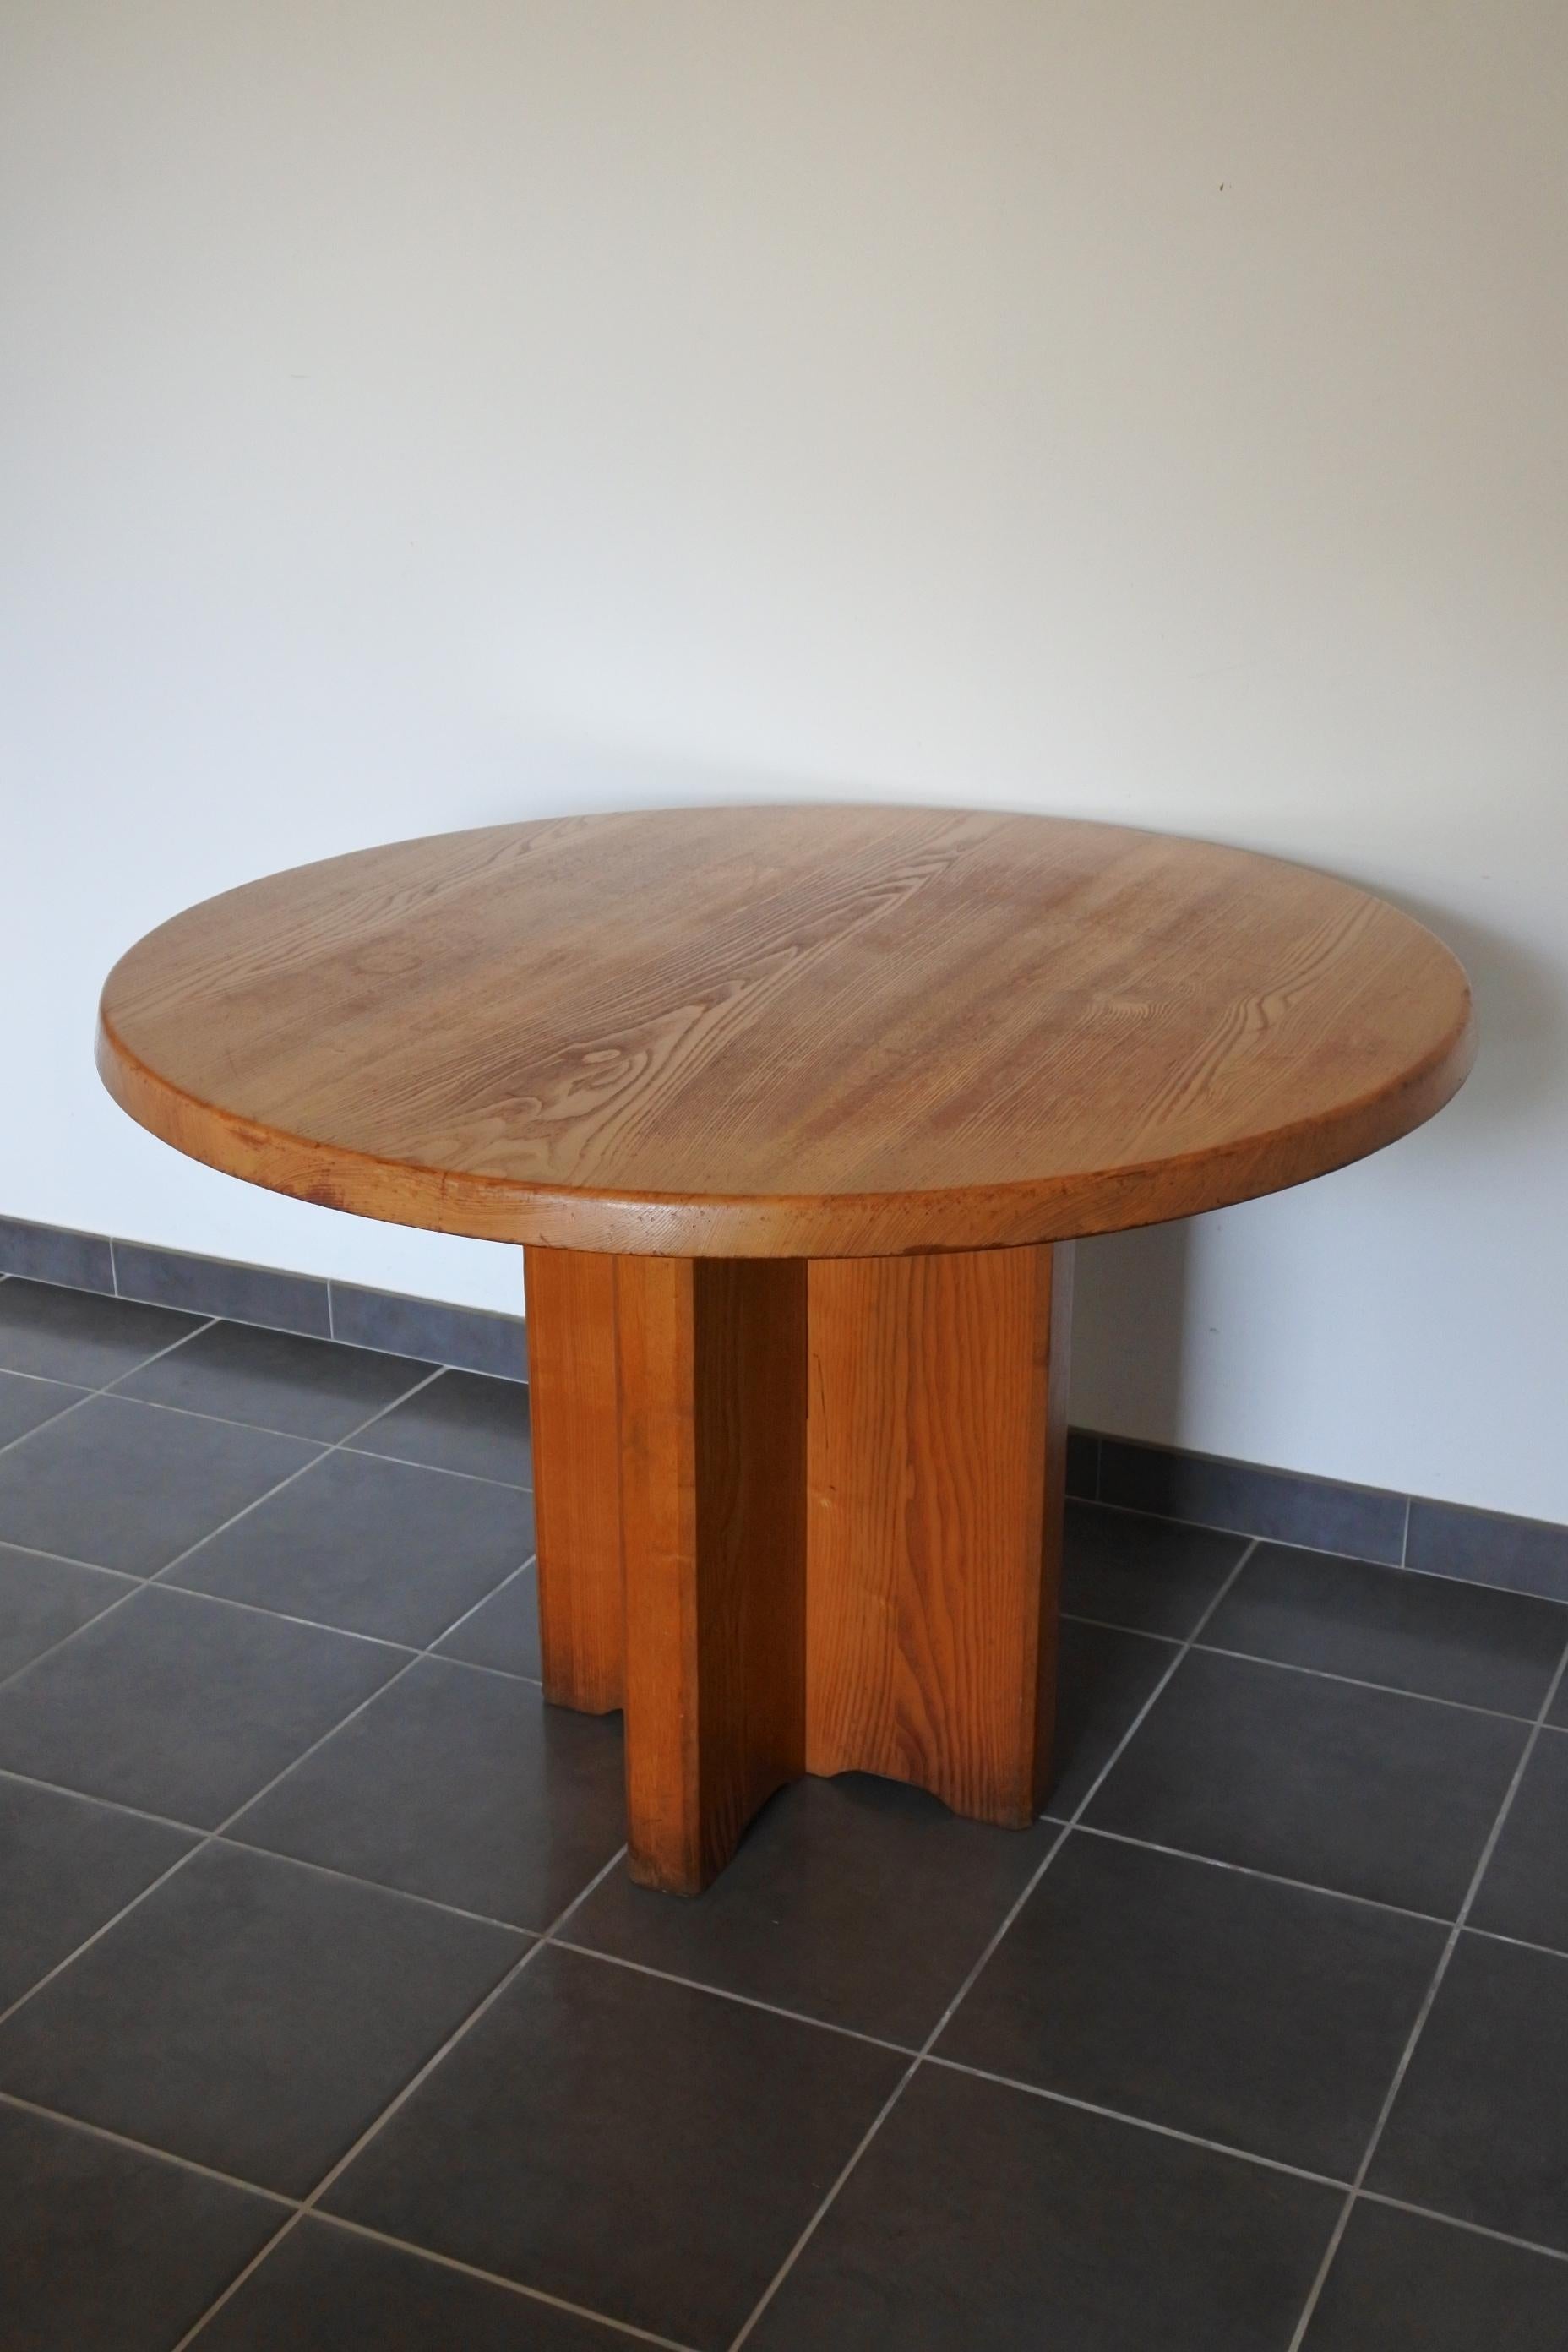 Round dining table in the manner of Pierre Chapo or Charlotte Perriand.
Solid ash wood.
Made in France in the 1970s.
Can accommodate 4 to 5 persons.
Outstanding grain.
Untouched condition.

Could also be used as a kitchen table or even a